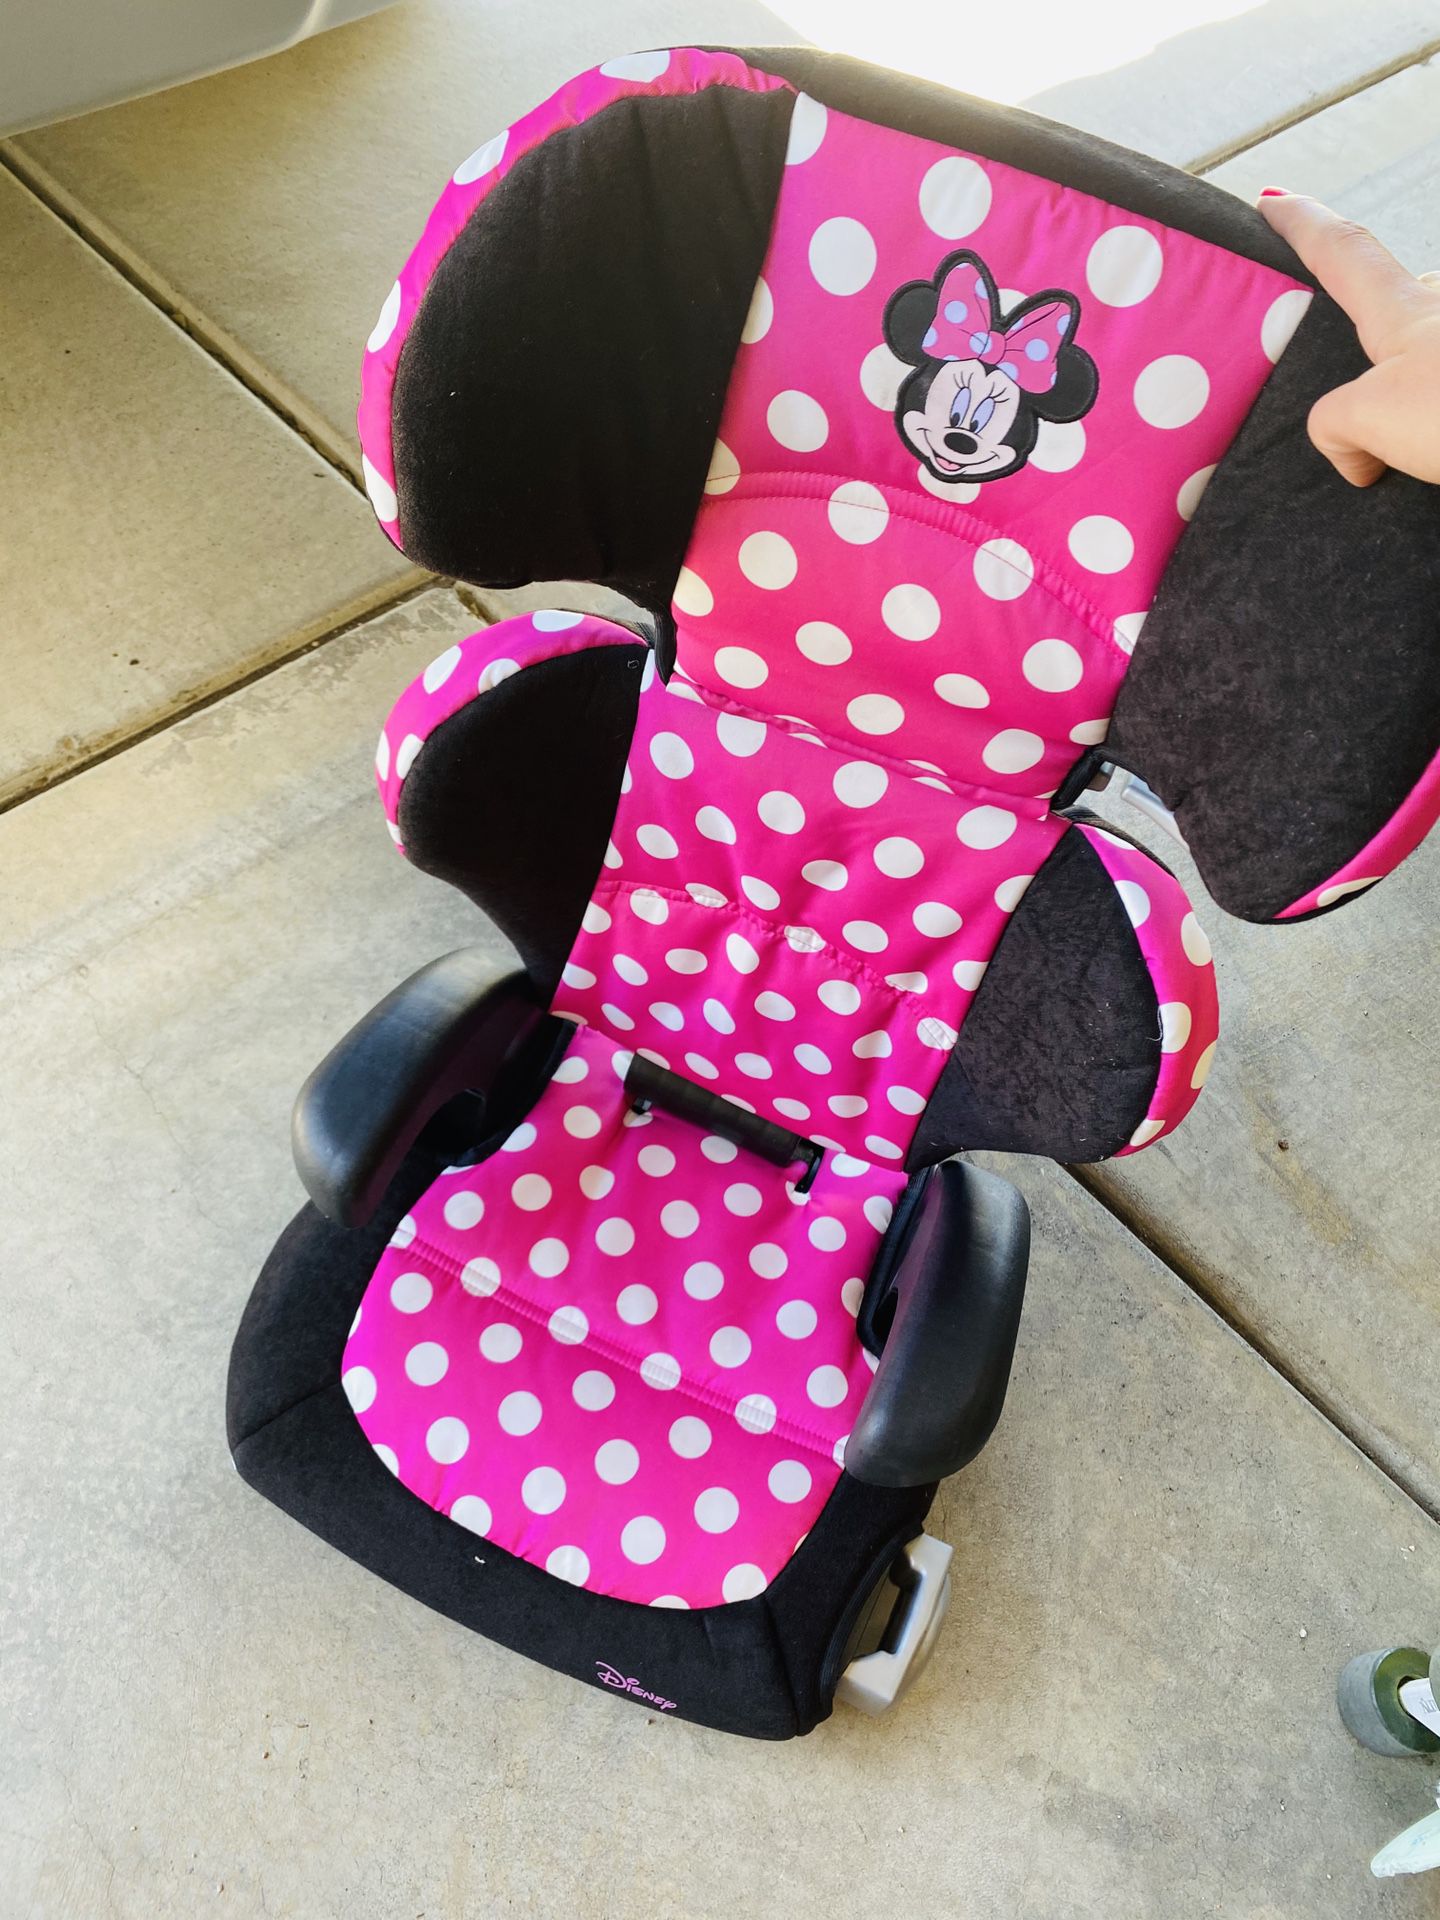 Disney Booster seat that converts to big kid booster